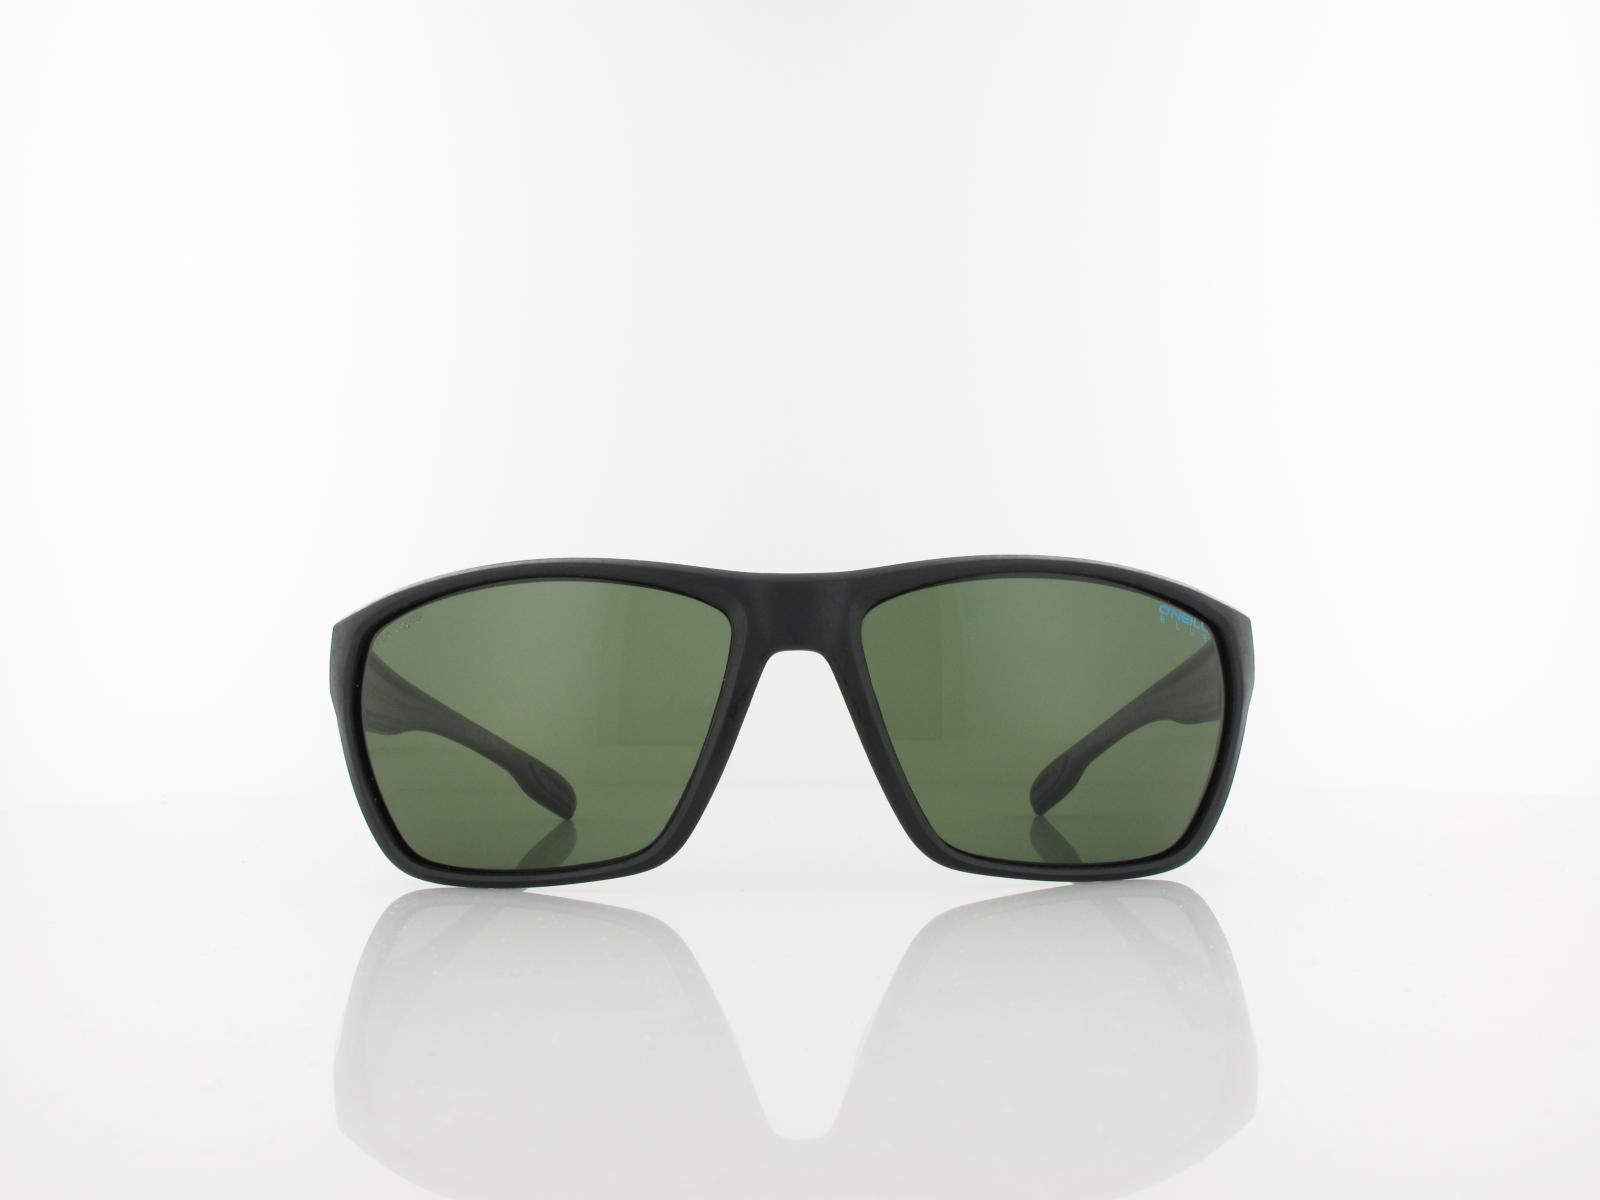 O'Neill | ONS Wove 2.0 127P 64 | matte black / solid green polarized